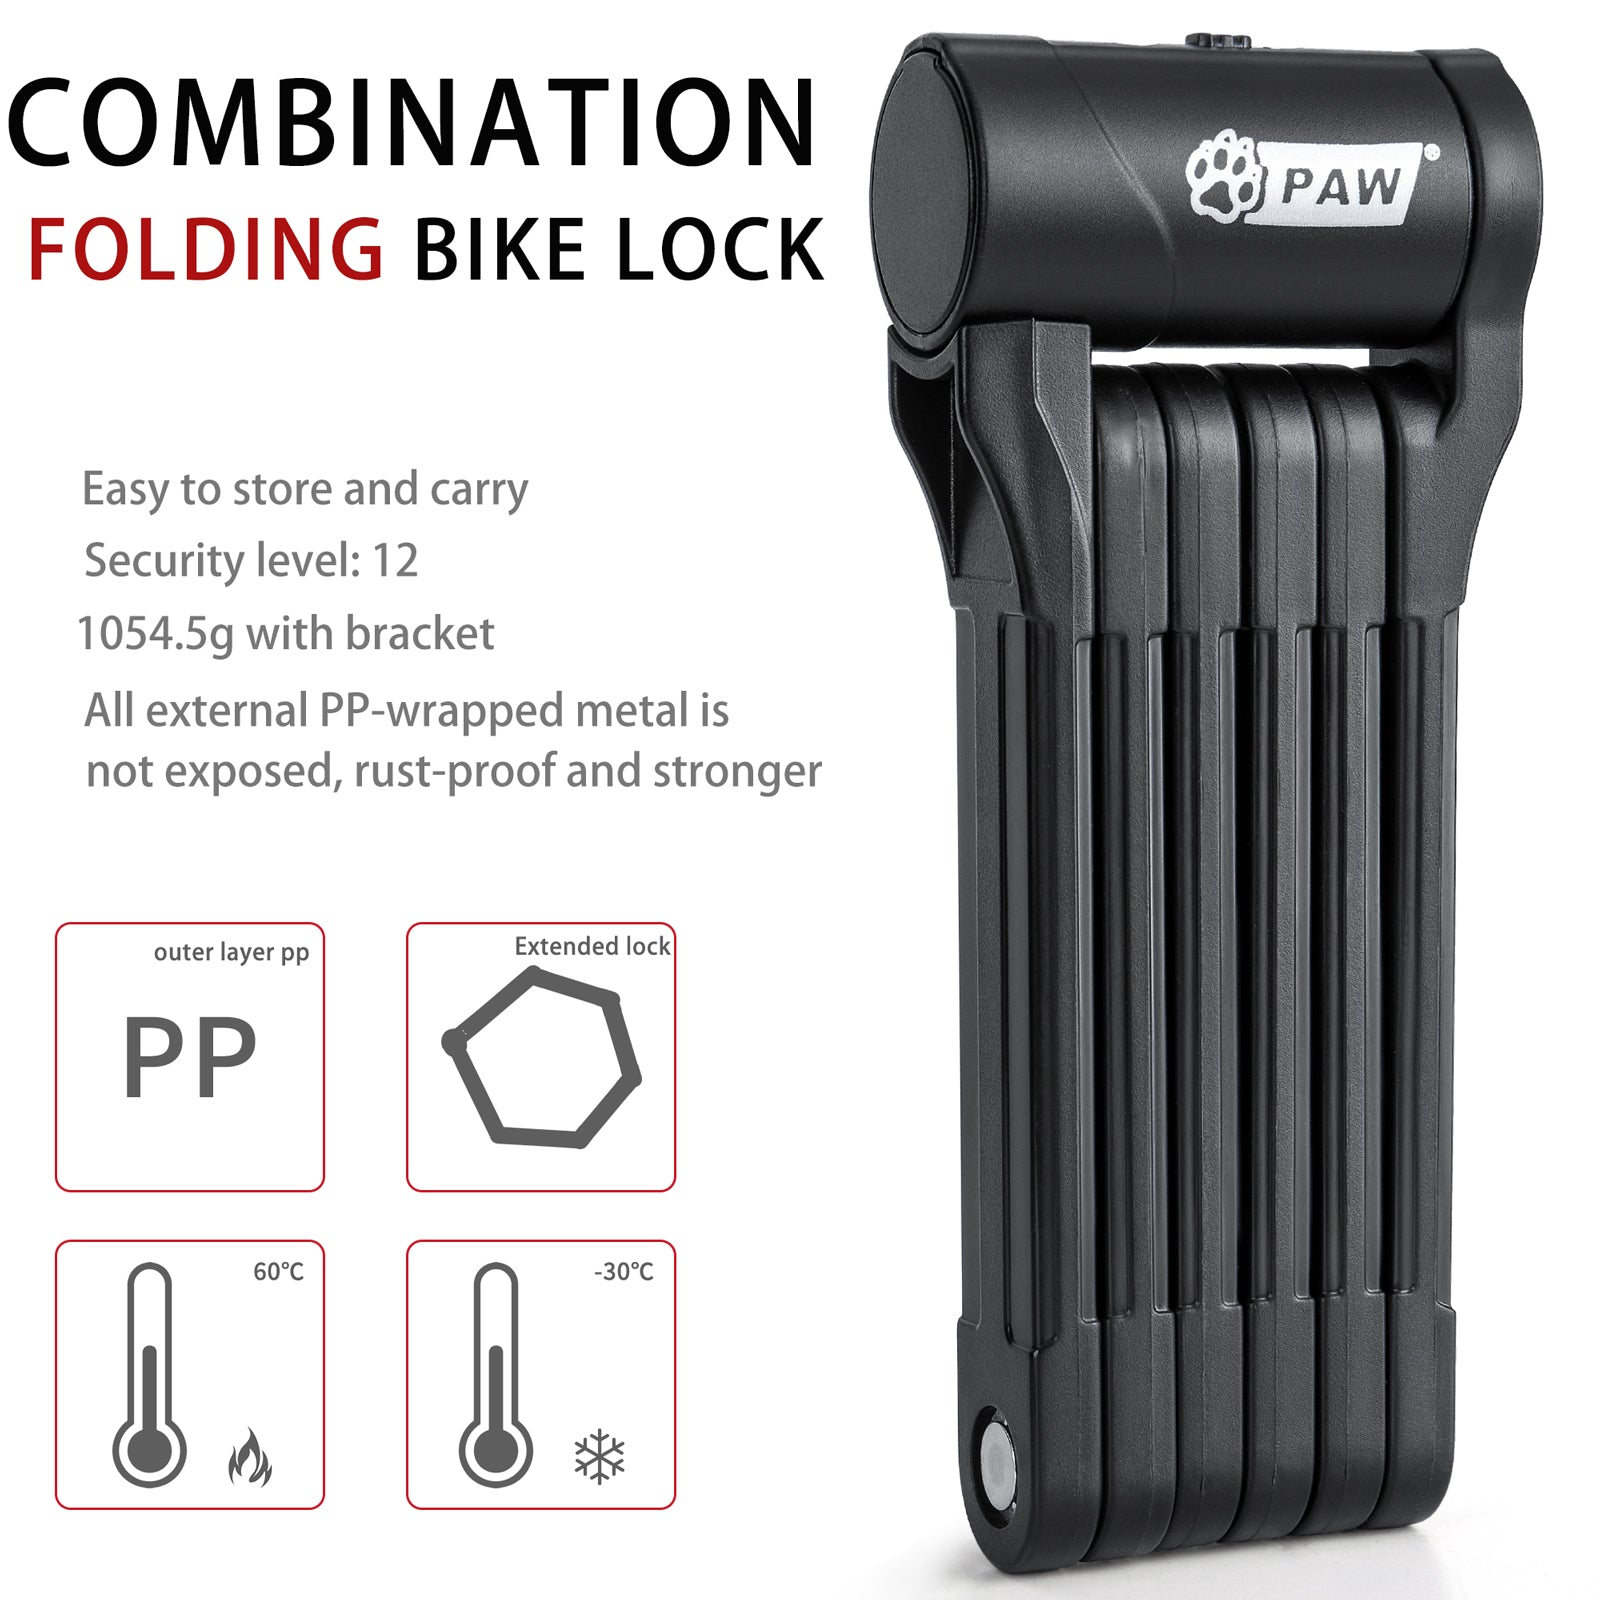 Folding Bike Lock with 3 Keys - Anti Theft Strong Security Bicycle Locks, Anti Drill & Pick Cylinder - Foldable Bike Lock with Mounting Bracket for Bikes E Bikes and Scooters